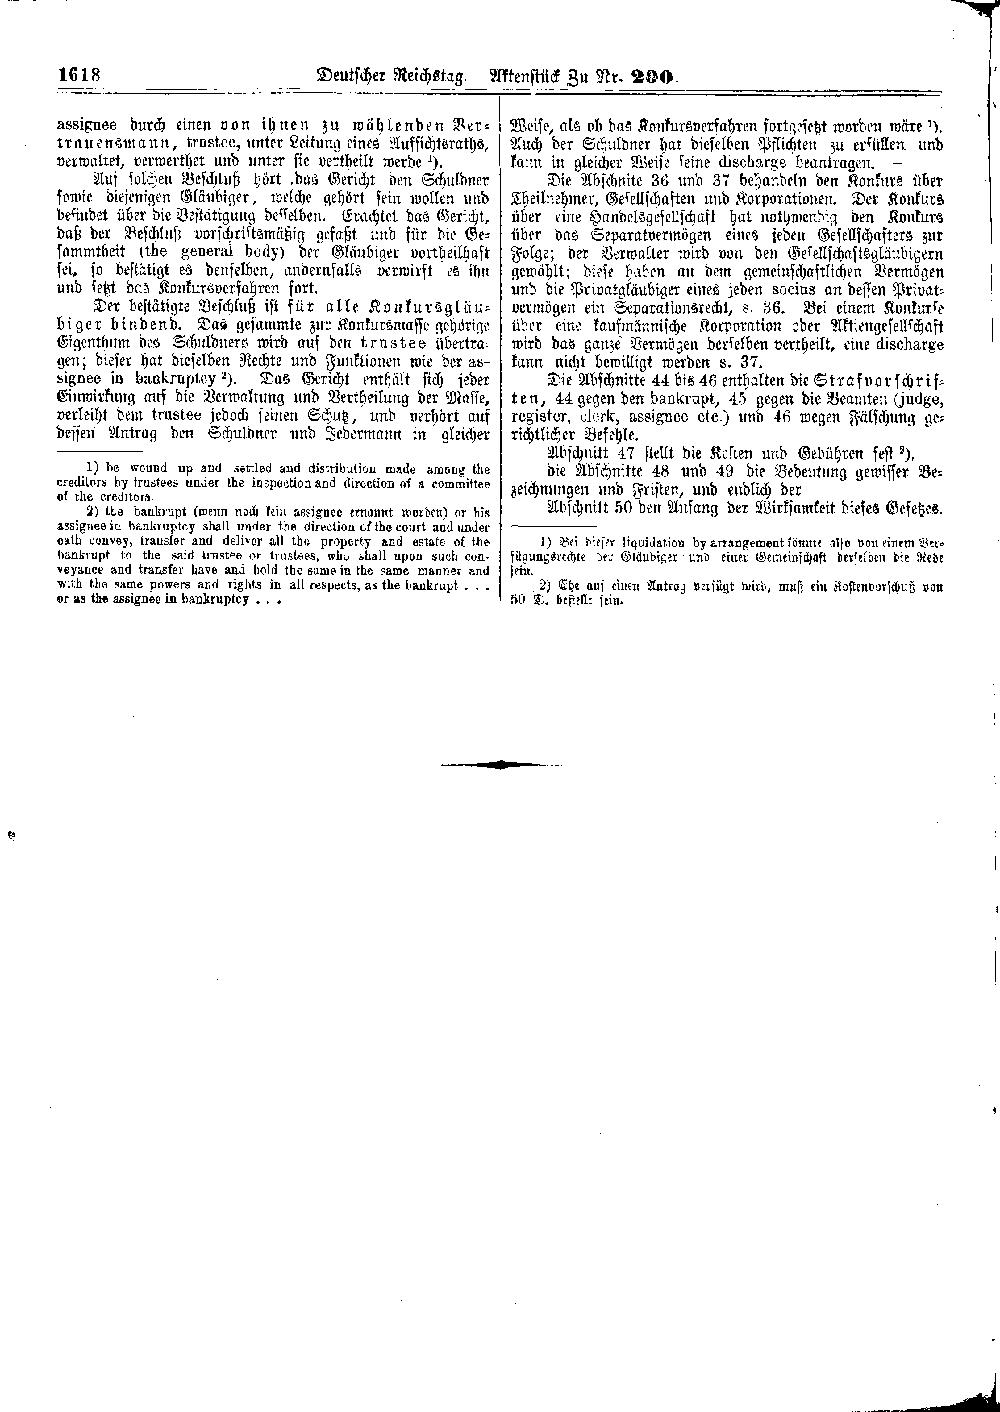 Scan of page 1618